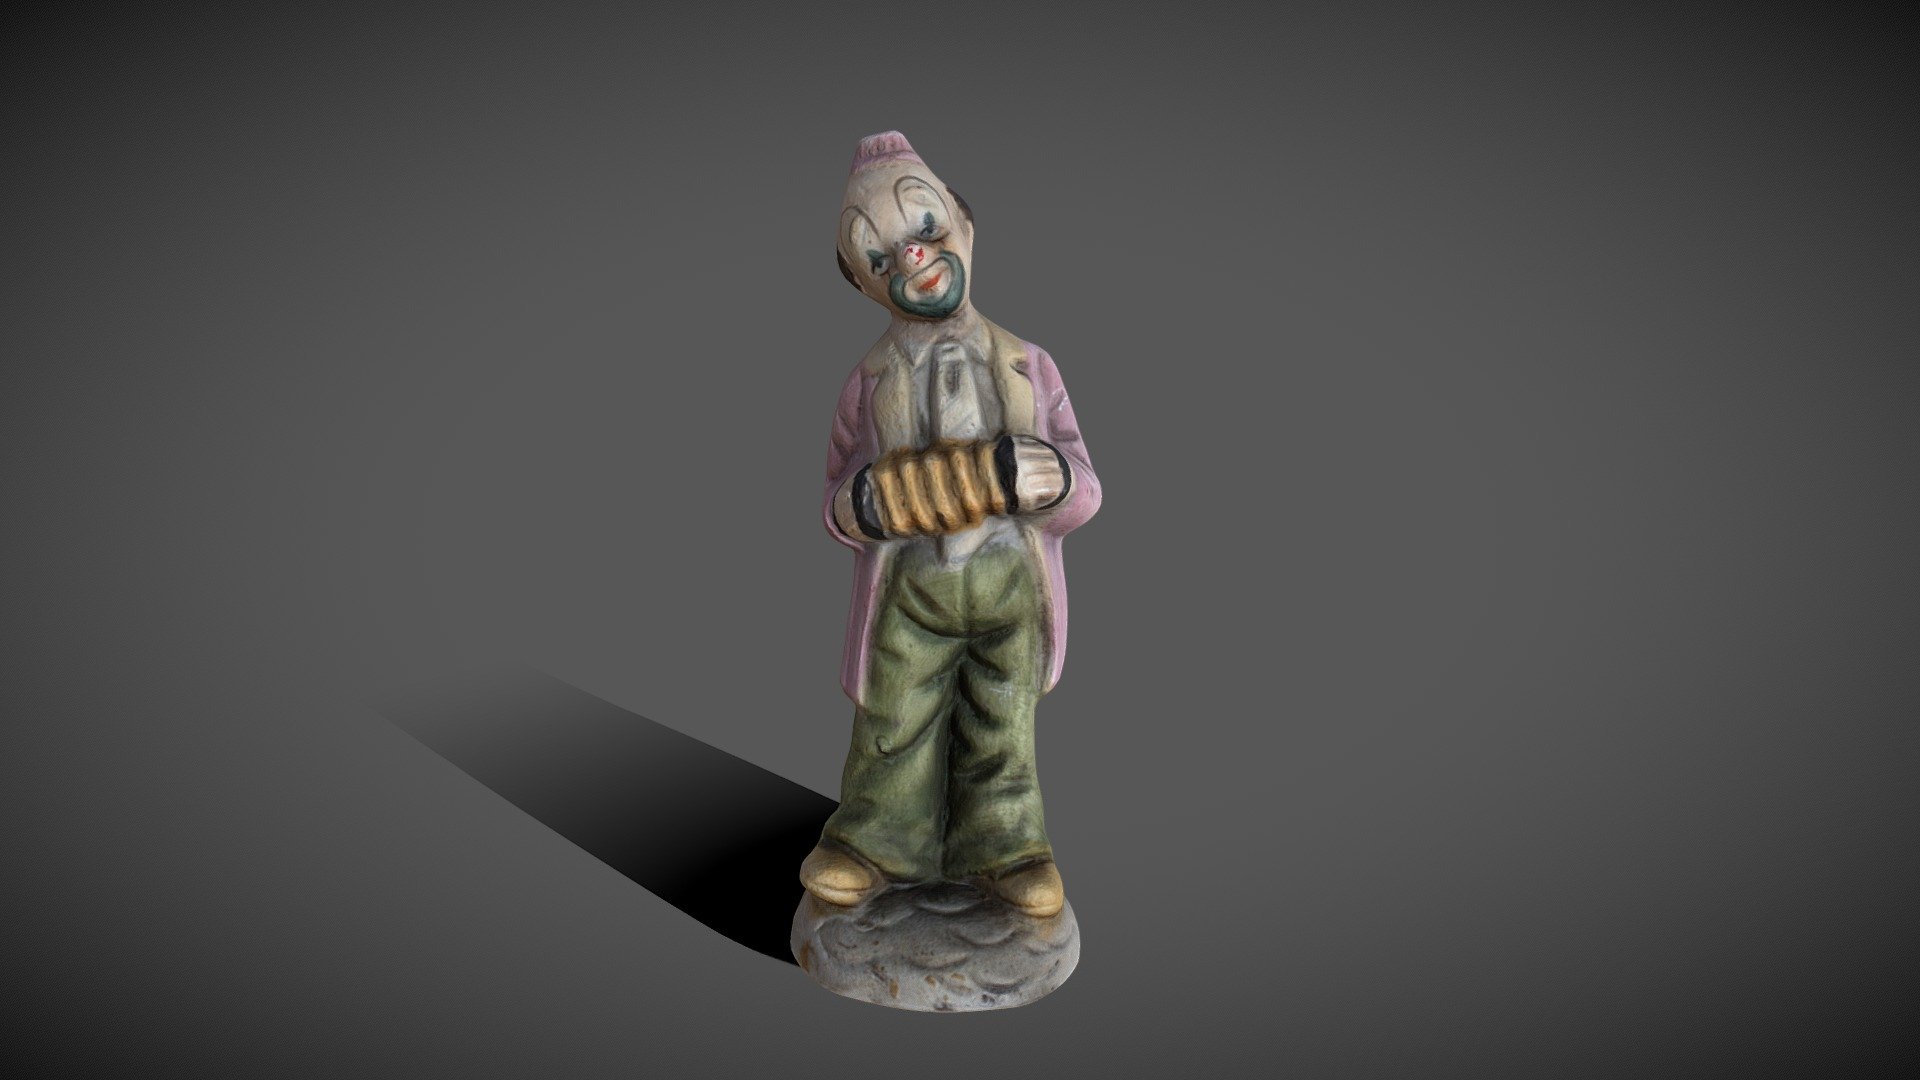 This clown statue was created inside of Reality Capture using a little over 100 photos. I than cleaned up the model inside of Zbrush creating a low poly and high polly version. Created UV's inside of Maya, before sending it to substance painter where I generated the texture maps. Touched up the normal and Albedo inside of photoshop. Finally uploading the final product here. Feel free to give me some critiques or ask me questions, always trying to get better 3d model